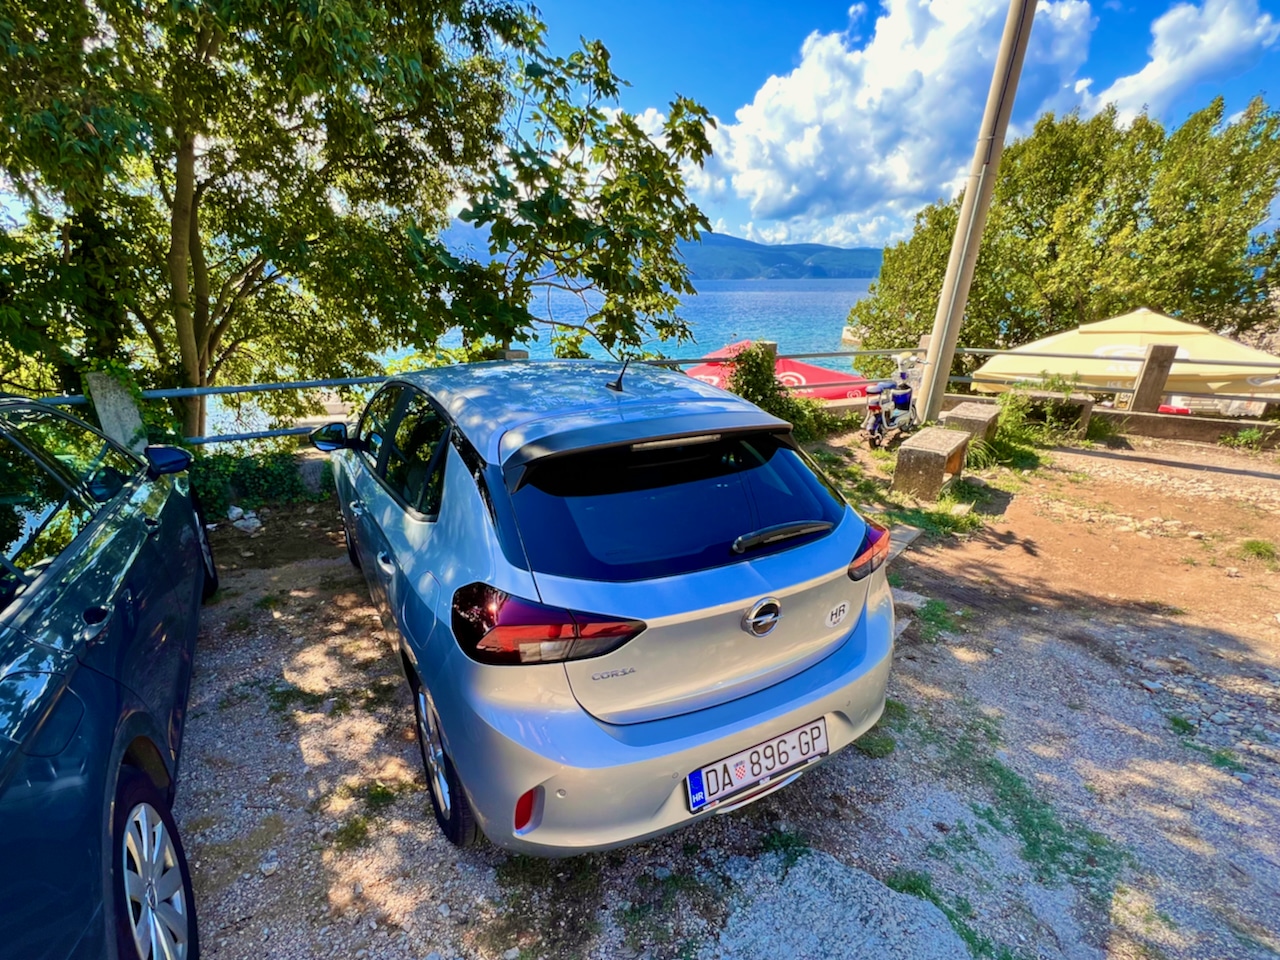 In Glavotok you can, with a bit of luck, get a free parking space right on the beach. Photo: Sascha Tegtmeyer Rental car Krk experience report - car routes on the island